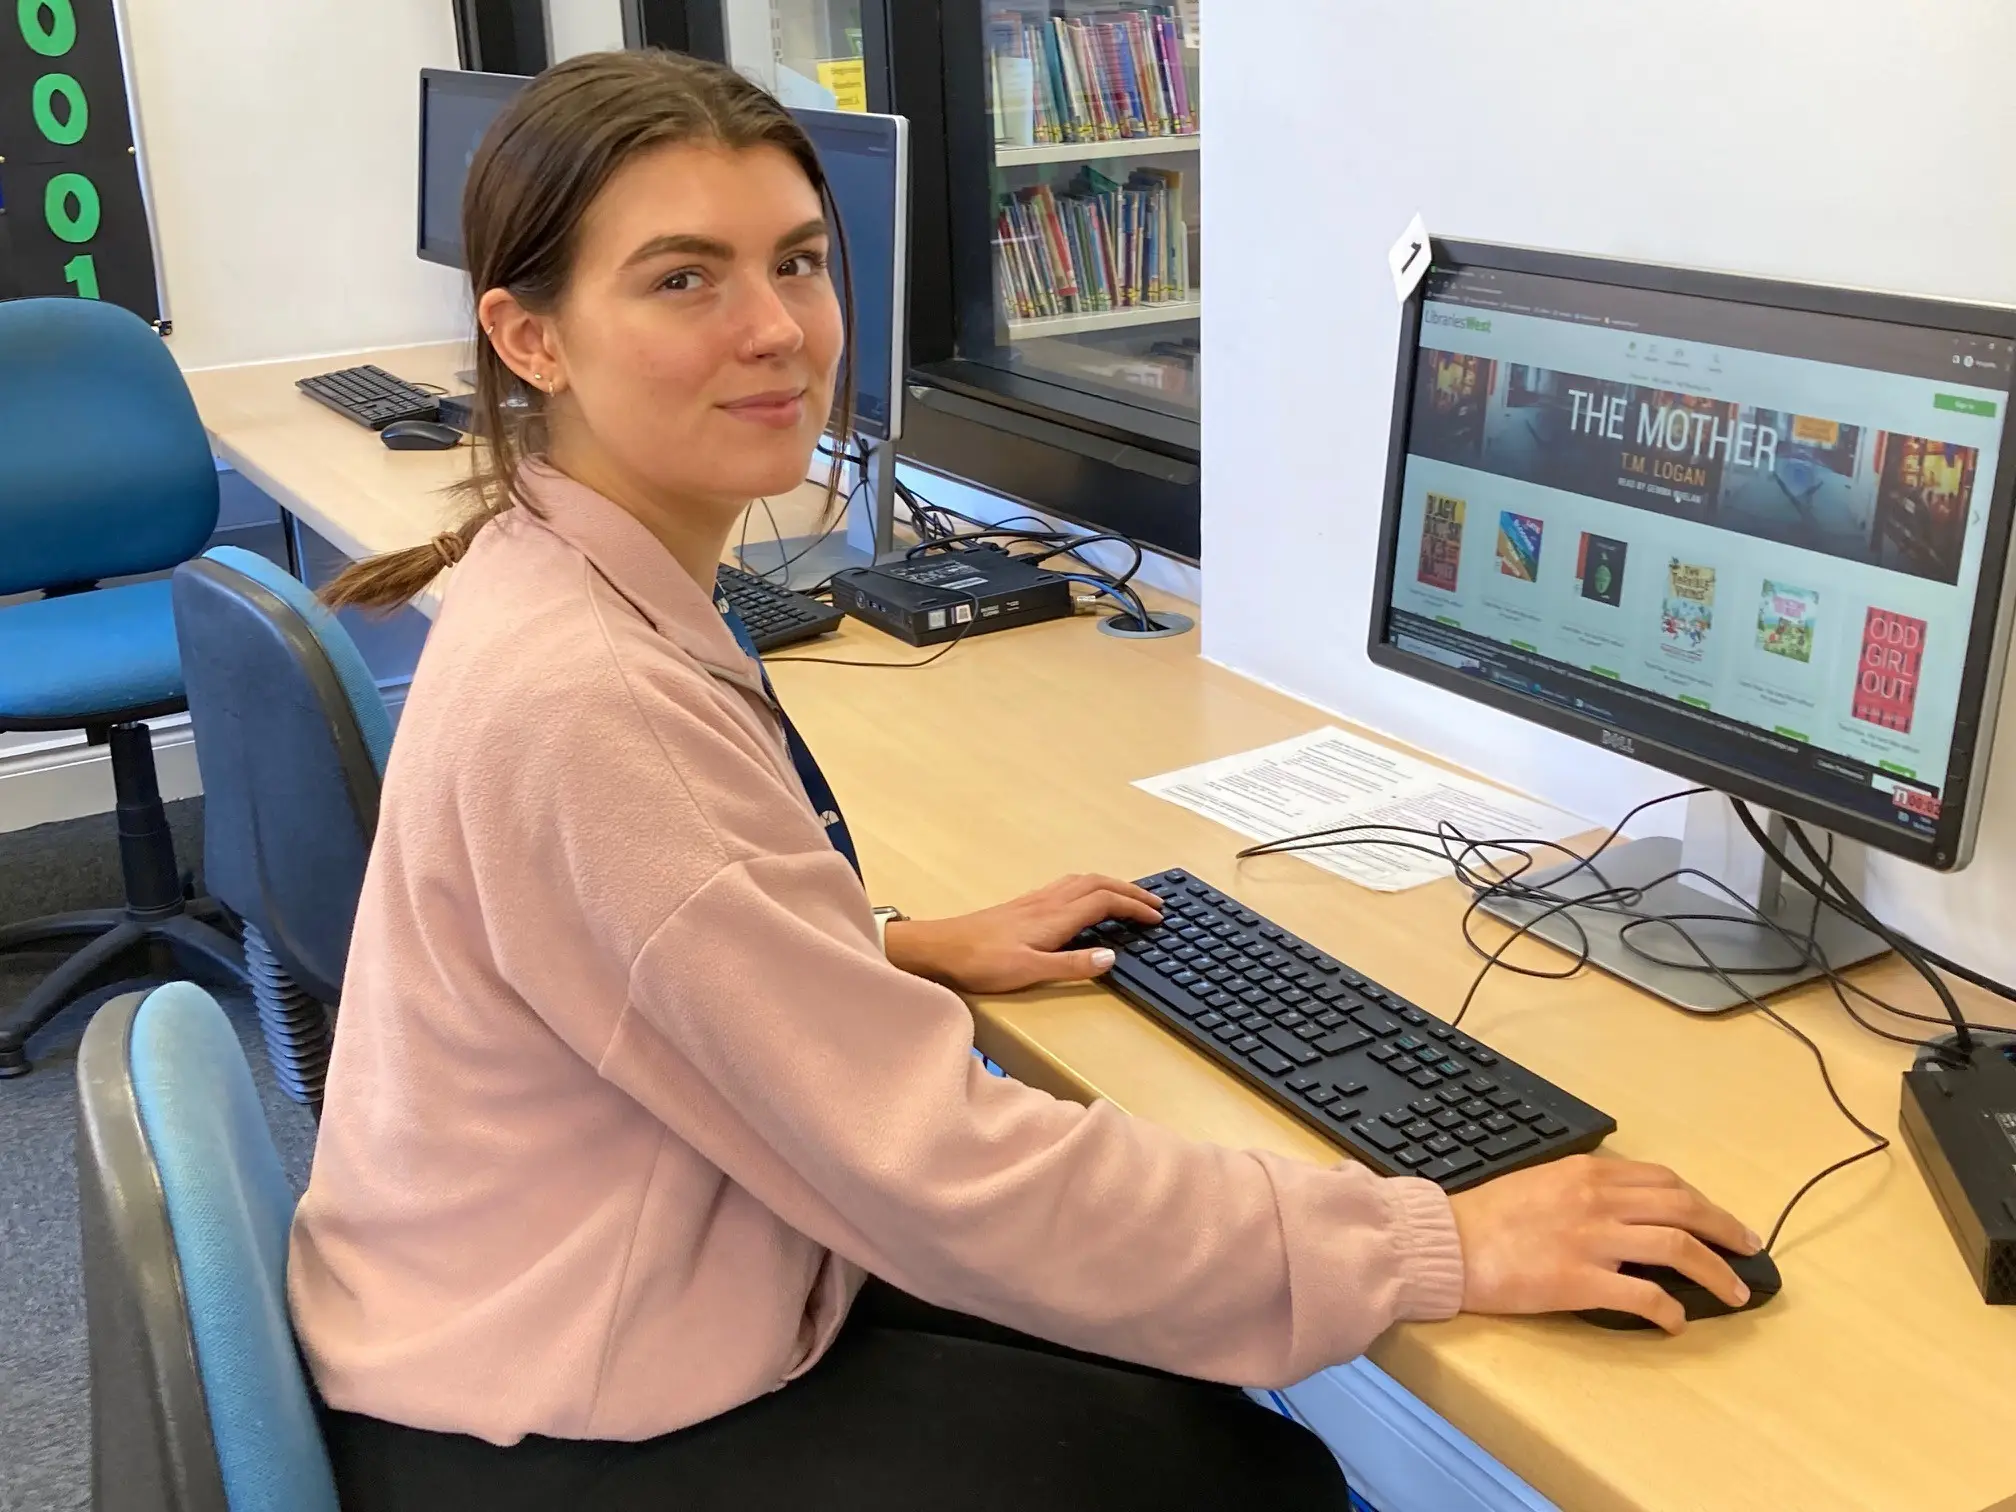 This is a picture of a library assistant sitting in front of a computer screen and keyboard, turning around smiling at the camera.